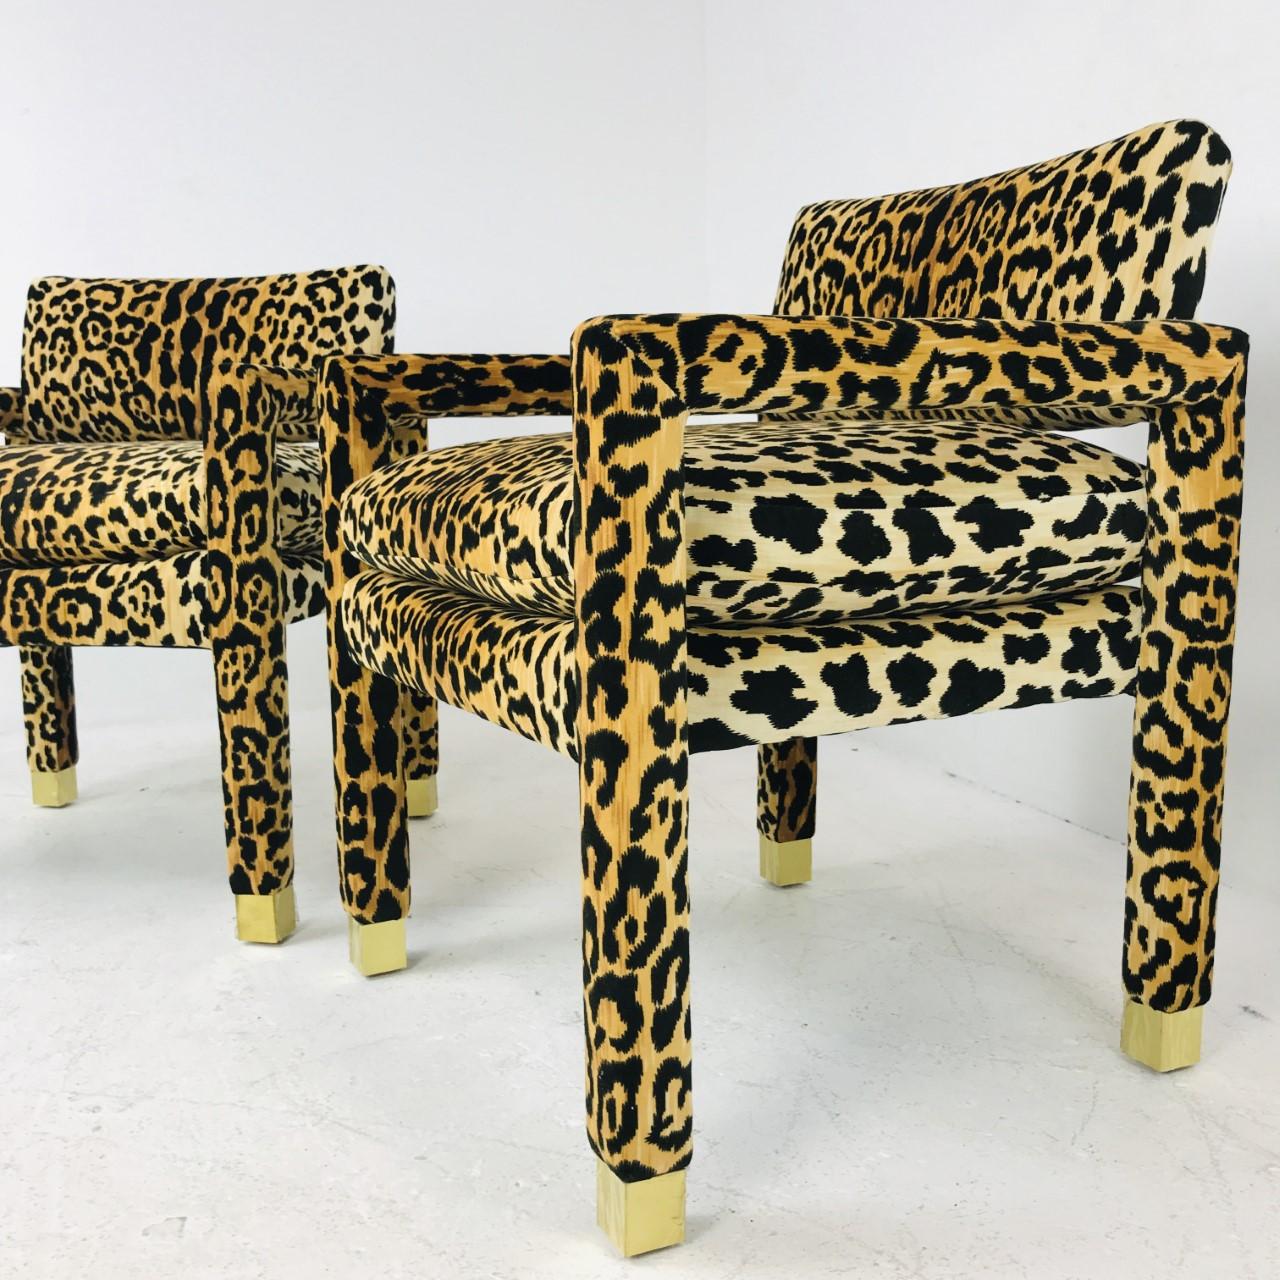 Pair of Milo Baughman Parsons chairs with custom brass sabots. Velvet leopard upholstery is new.